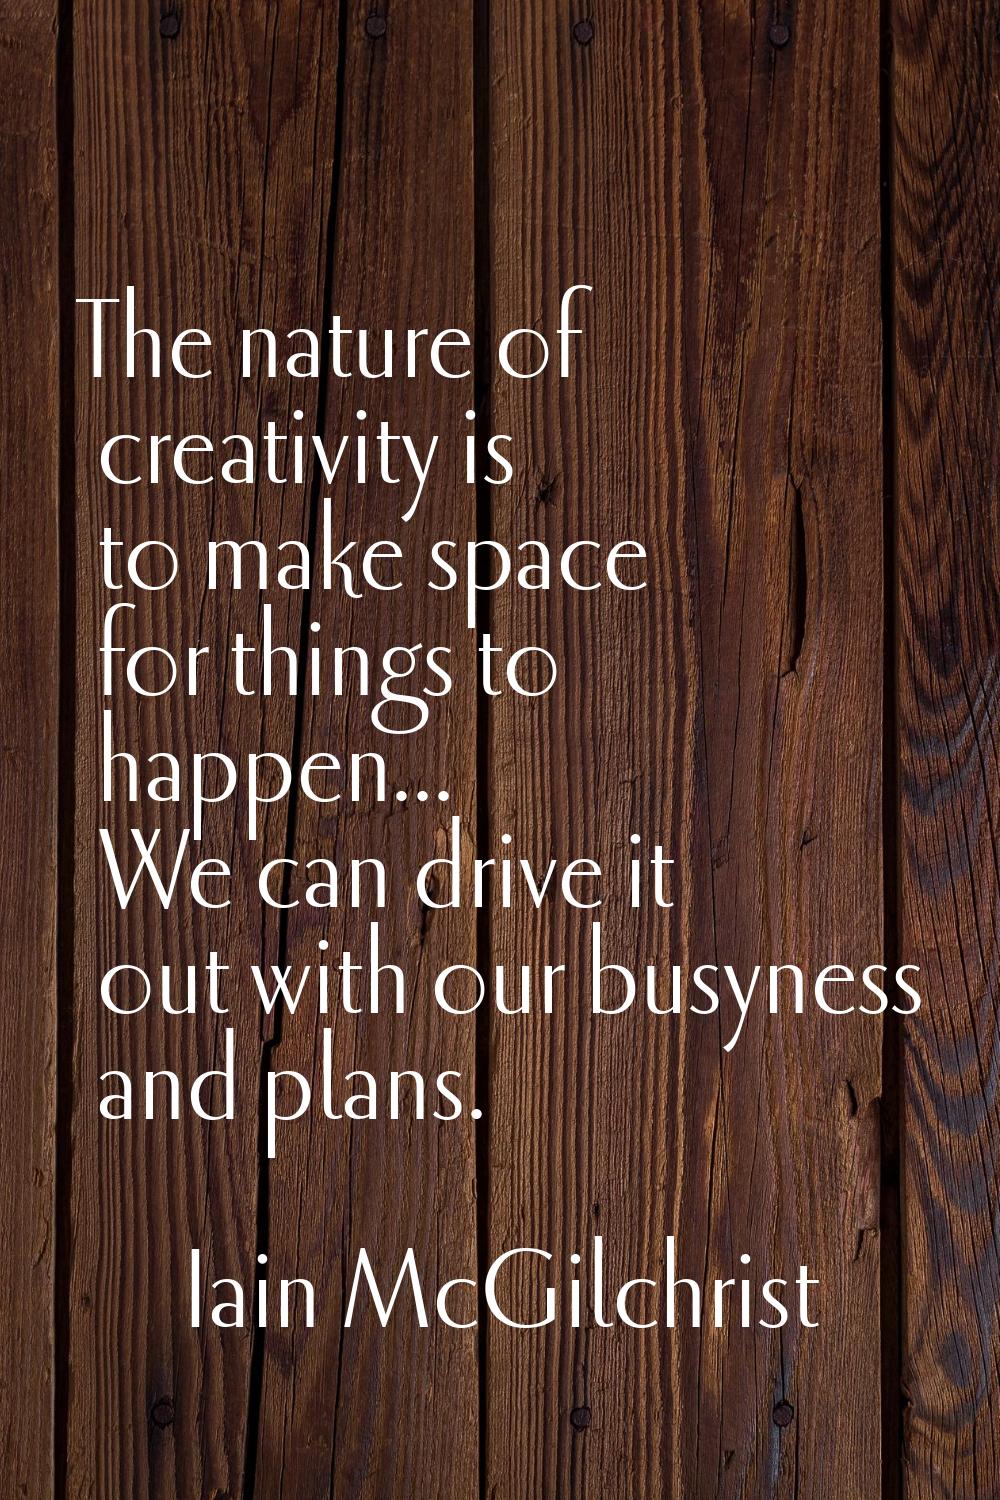 The nature of creativity is to make space for things to happen... We can drive it out with our busy